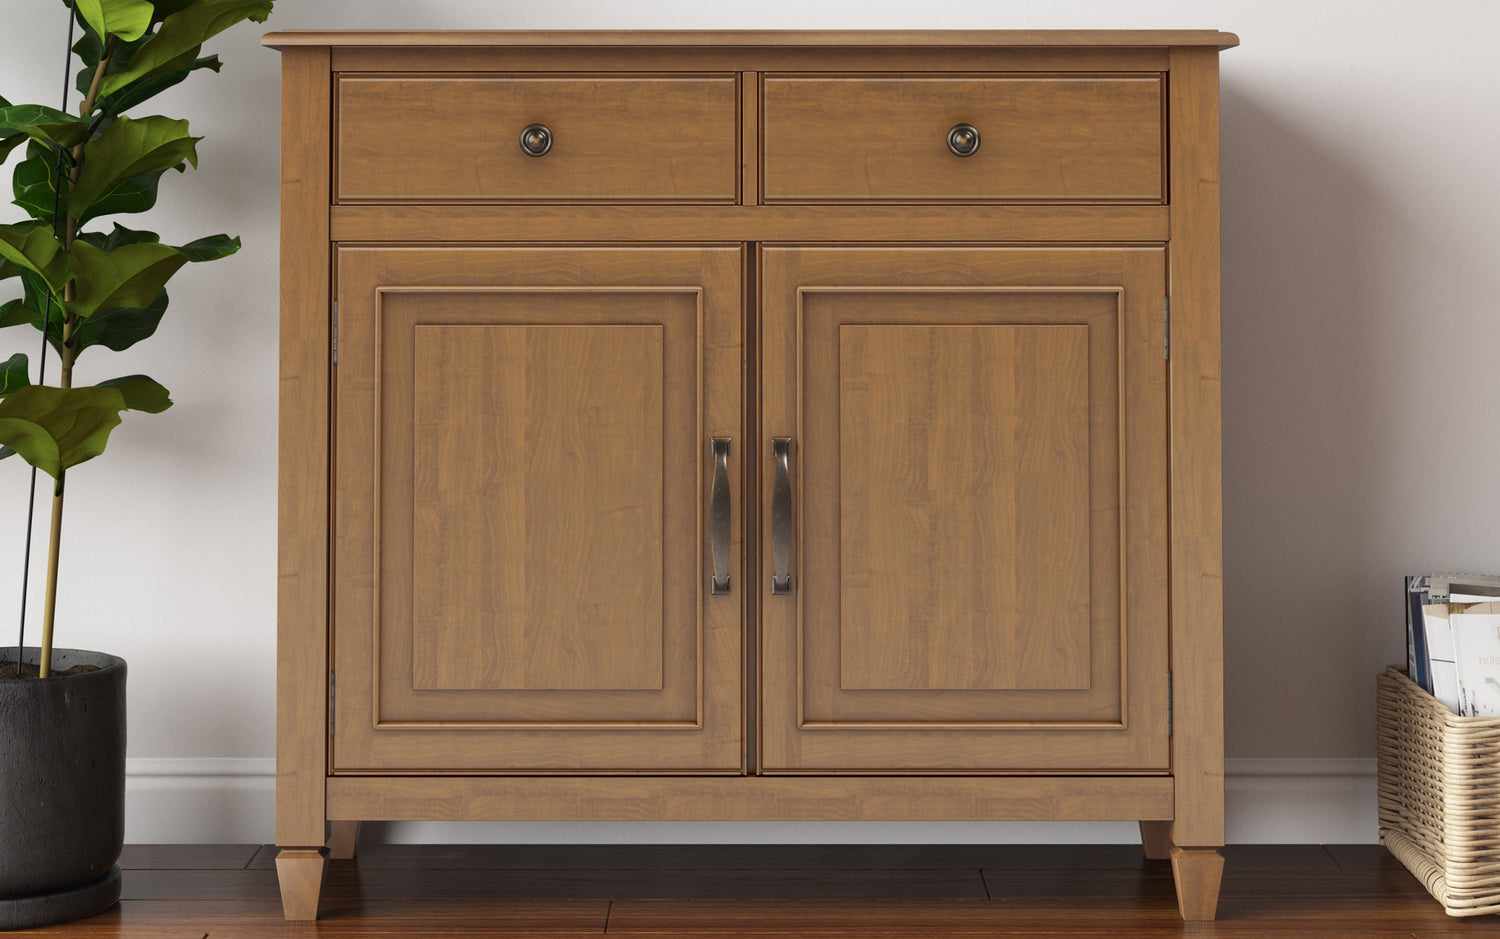 Light Golden Brown | Connaught Entryway Storage Cabinet